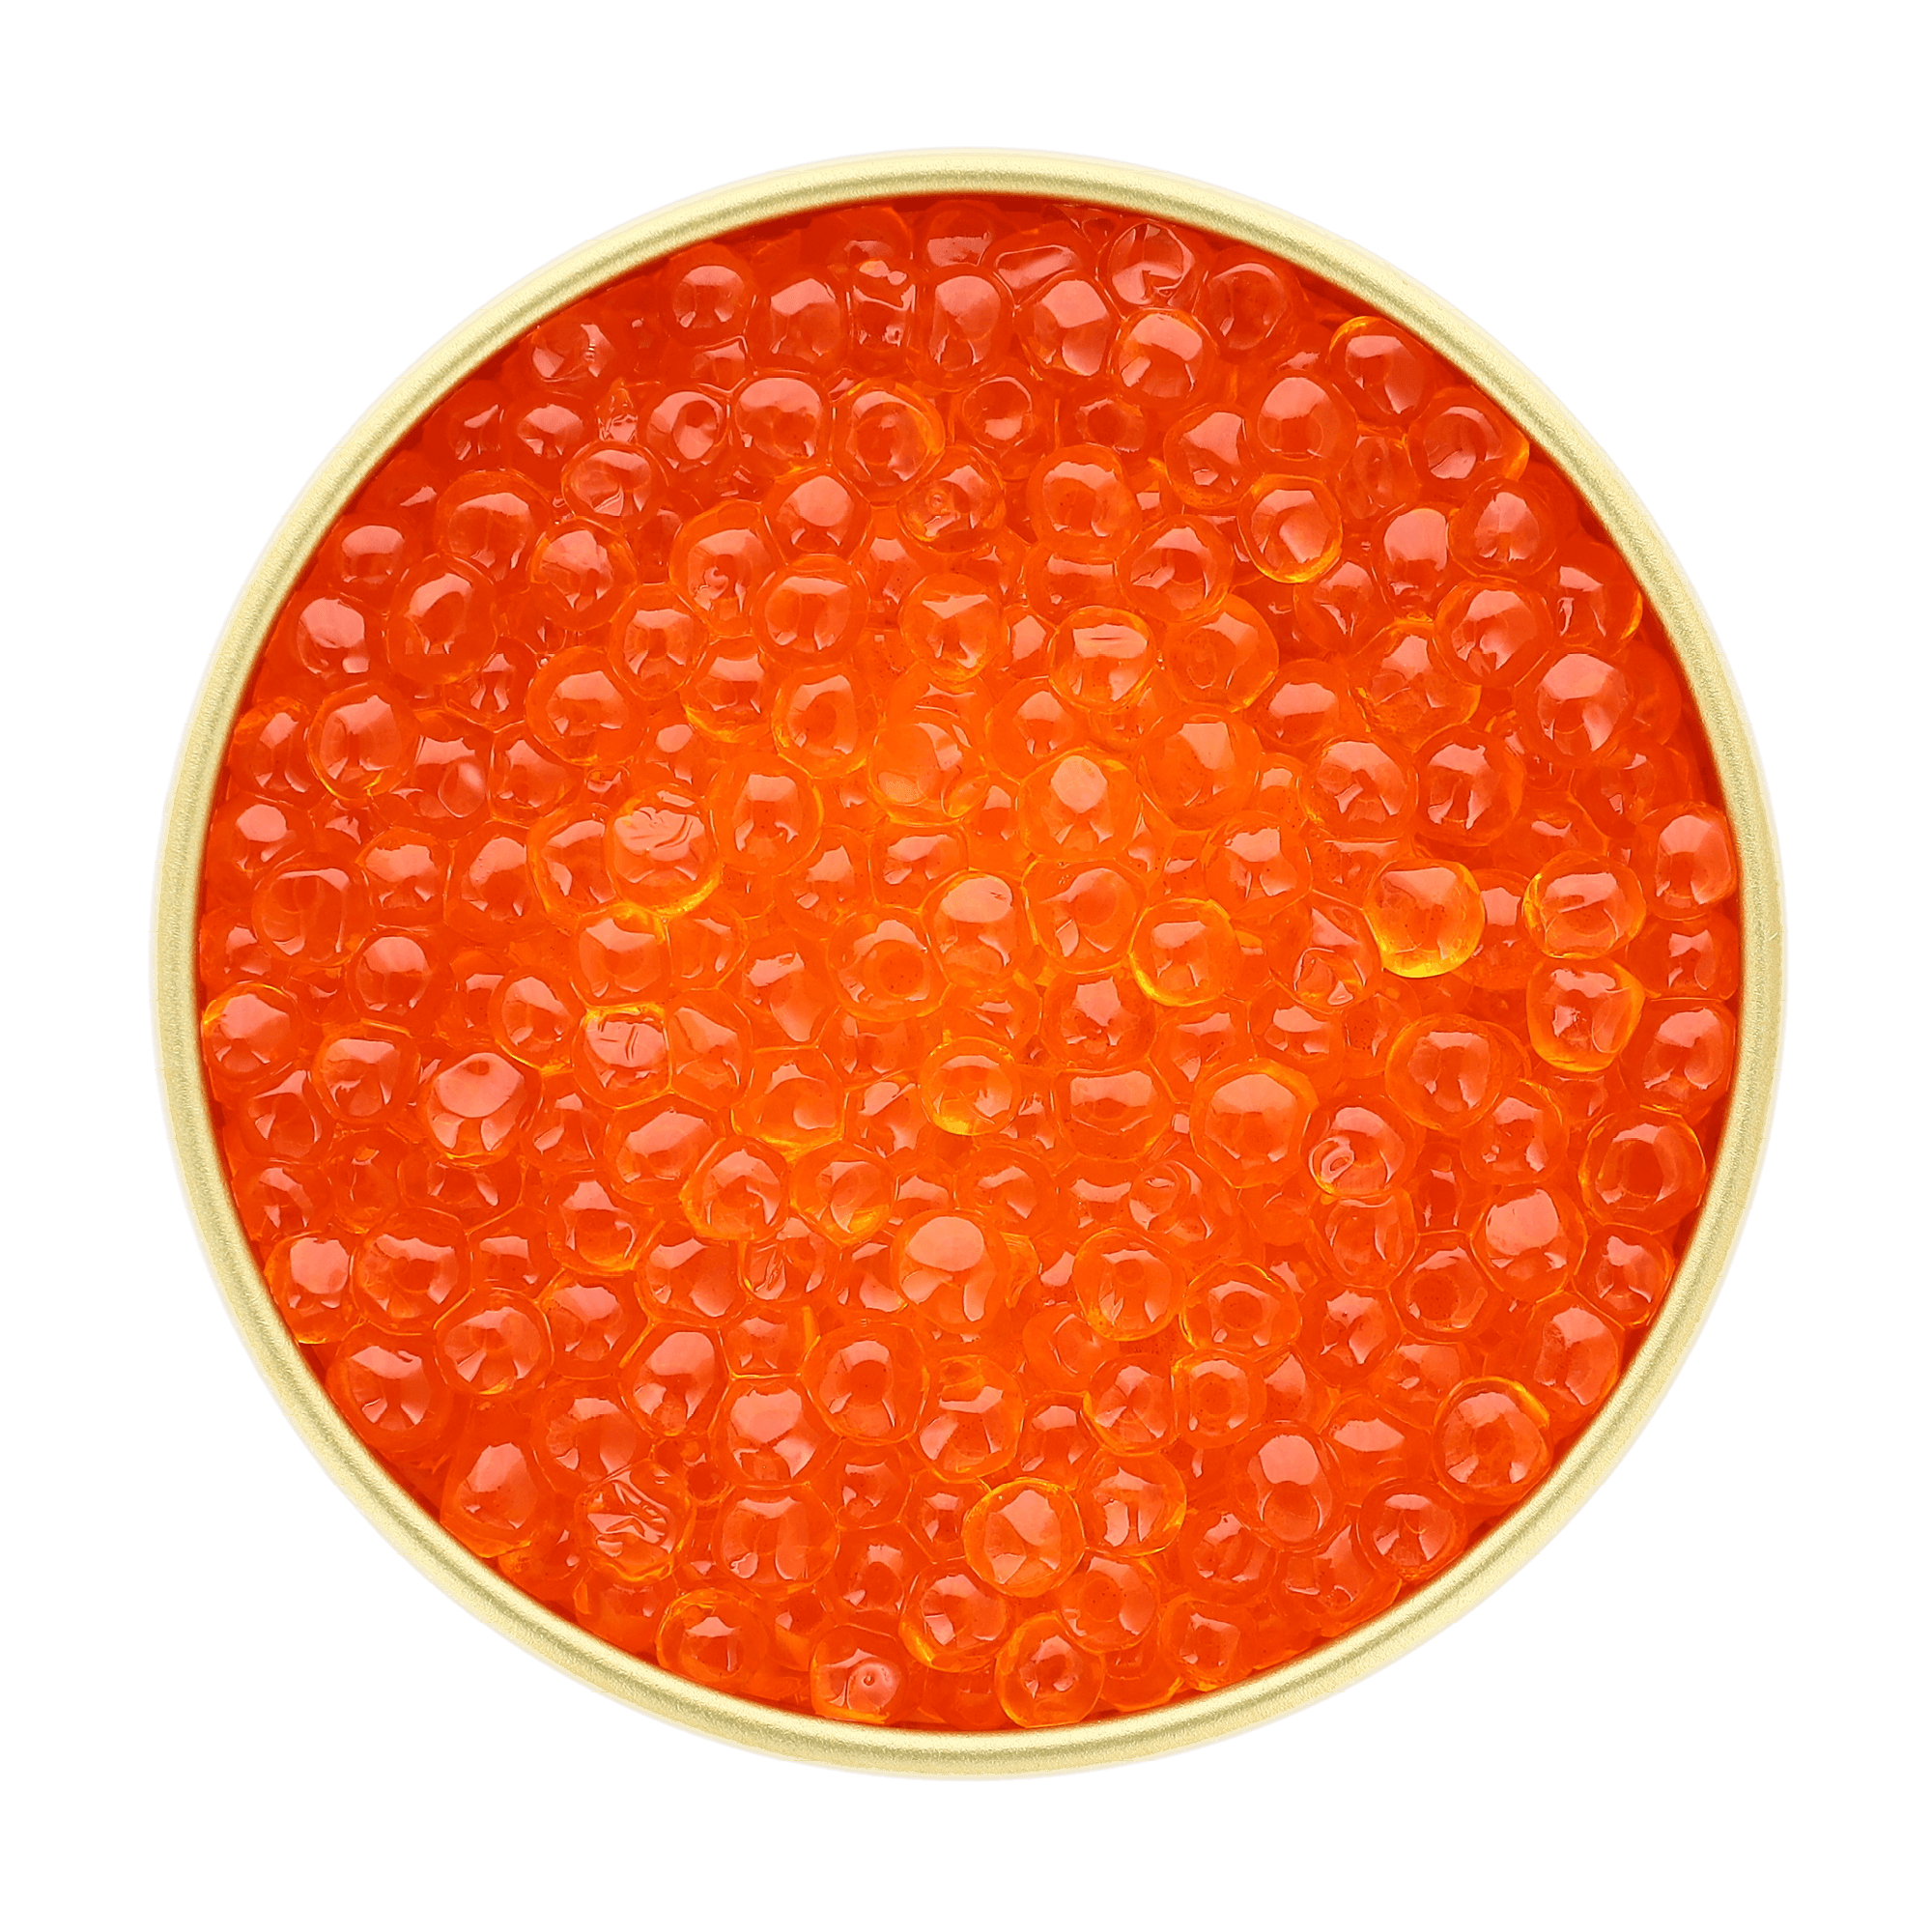 Trout Roe Smoked - Savory Gourmet